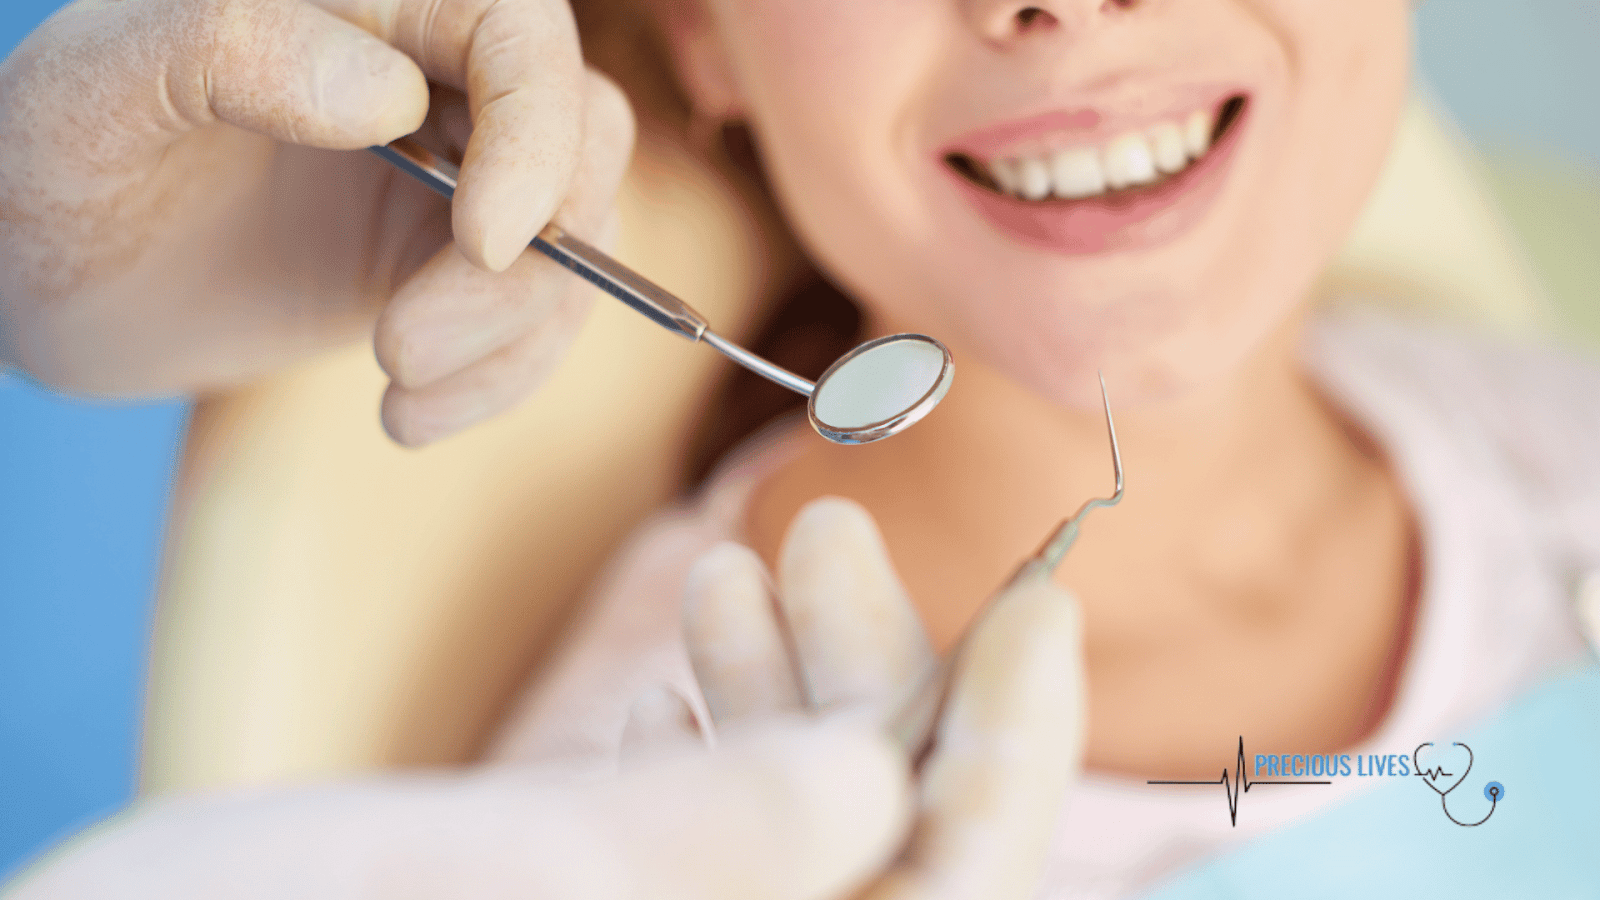 prescription for tooth infection online dentist